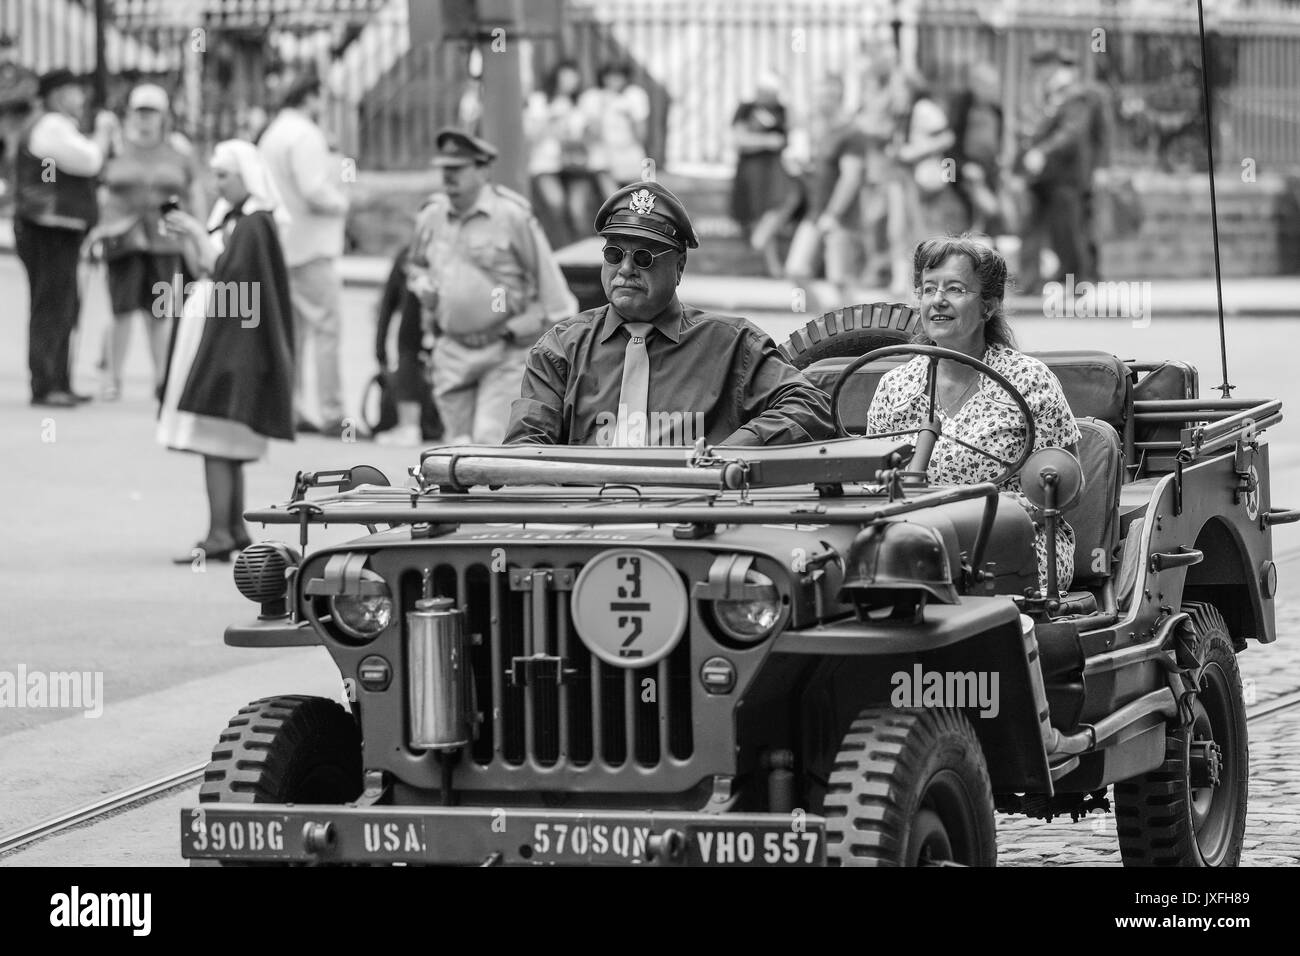 1940s Evento, National Tramway Museum, Crich, Agosto 2017 Foto Stock